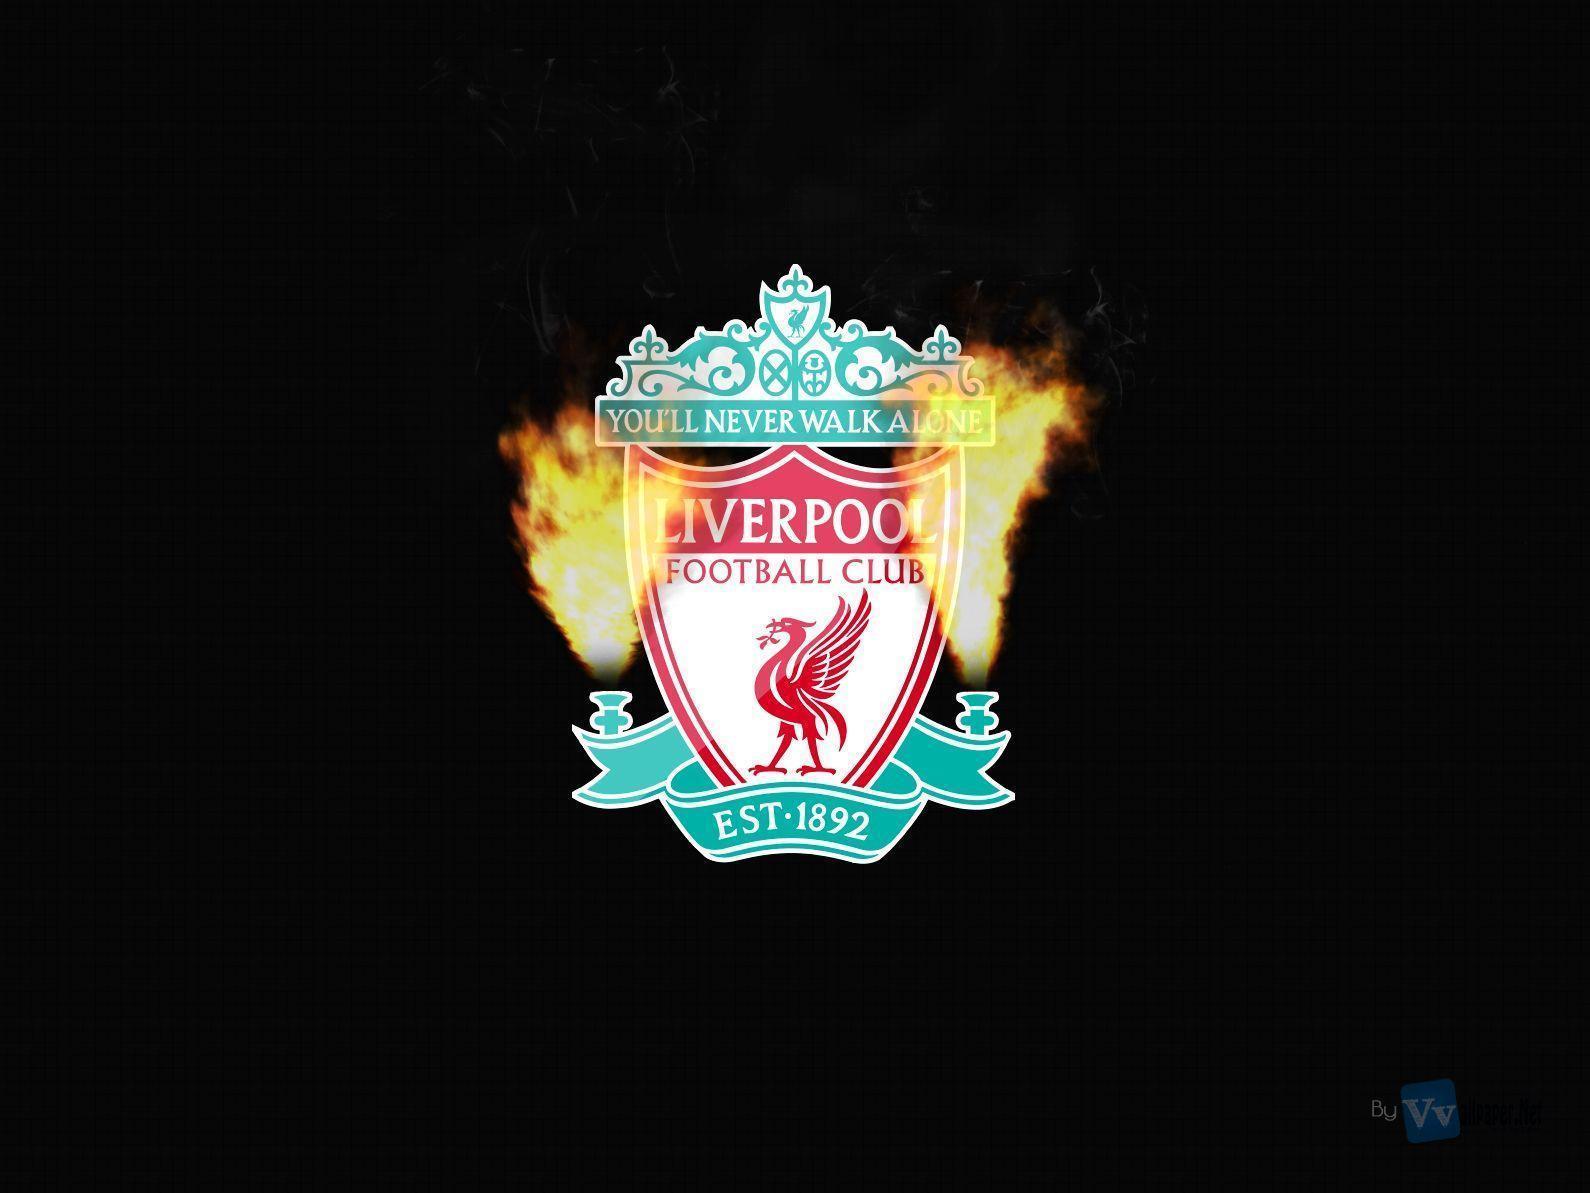 Liverpool Fc Live Wallpaper For Android. Liverpool Fc Image